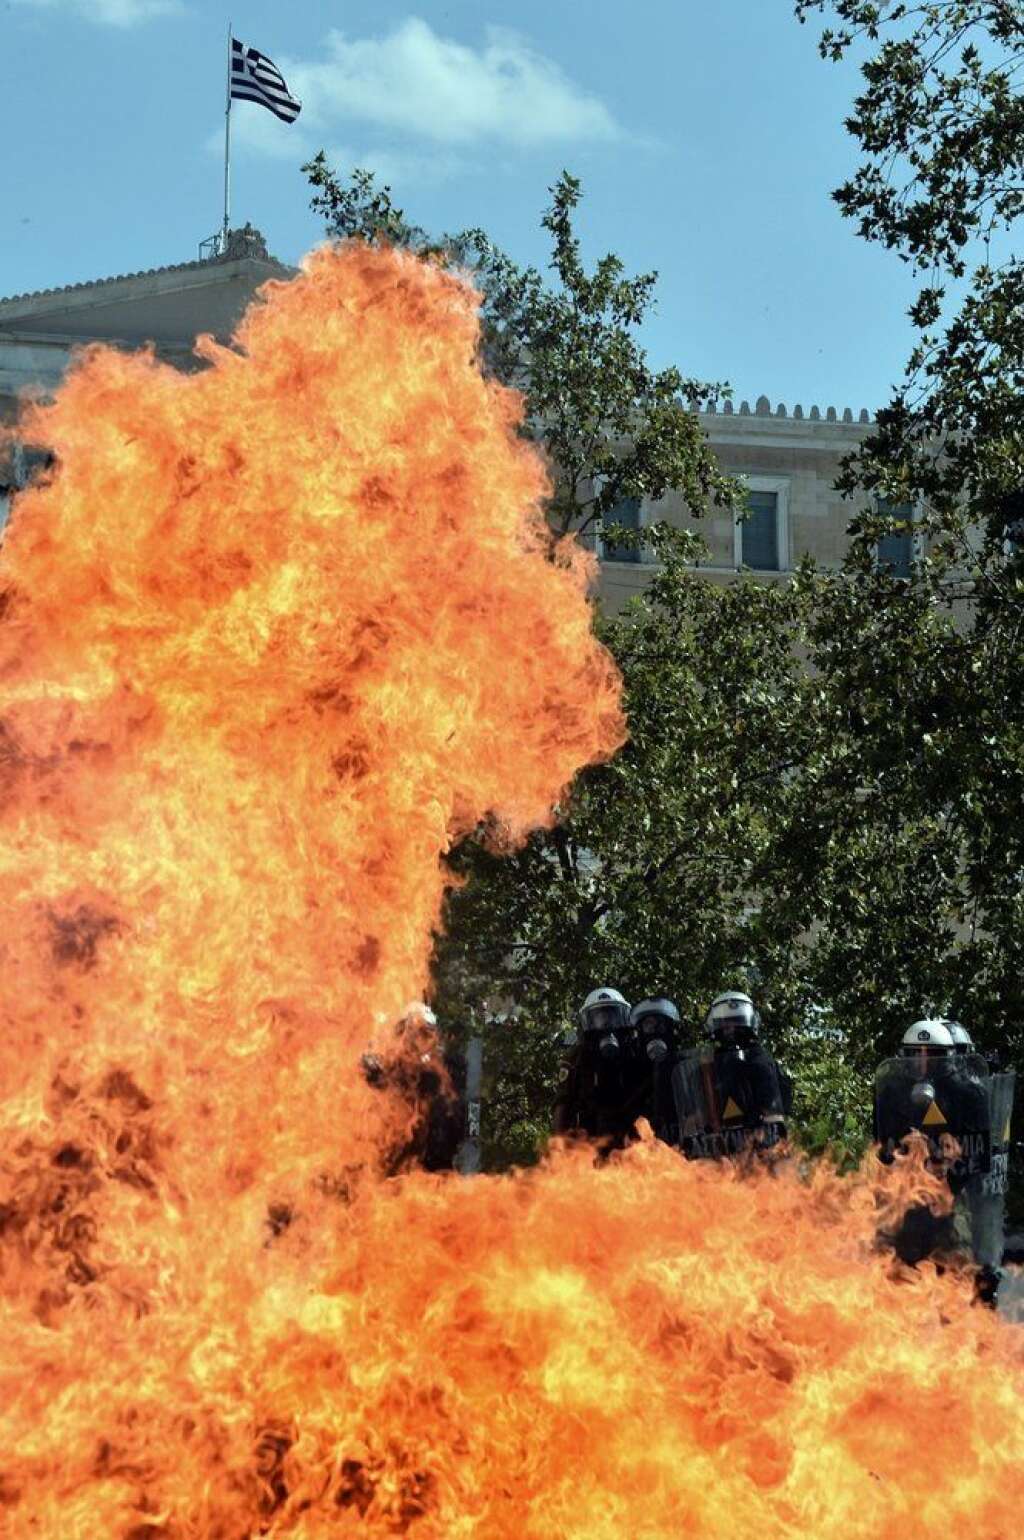 GREECE-FINANCE-PUBLIC-DEBT-EU-STRIKE - A firebomb explodes in front of riot police forces during clashes with demonstrators during a rally marking a 24-hour general strike on October 18, 2012 near the parliament in Athens. Greek riot police on Thursday fired tear gas to disperse protesters at an anti-austerity rally in Athens held during a national general strike as EU leaders were to tackle the eurozone crisis at a summit in Brussels.  AFP PHOTO / ARIS MESSINIS        (Photo credit should read ARIS MESSINIS/AFP/Getty Images)